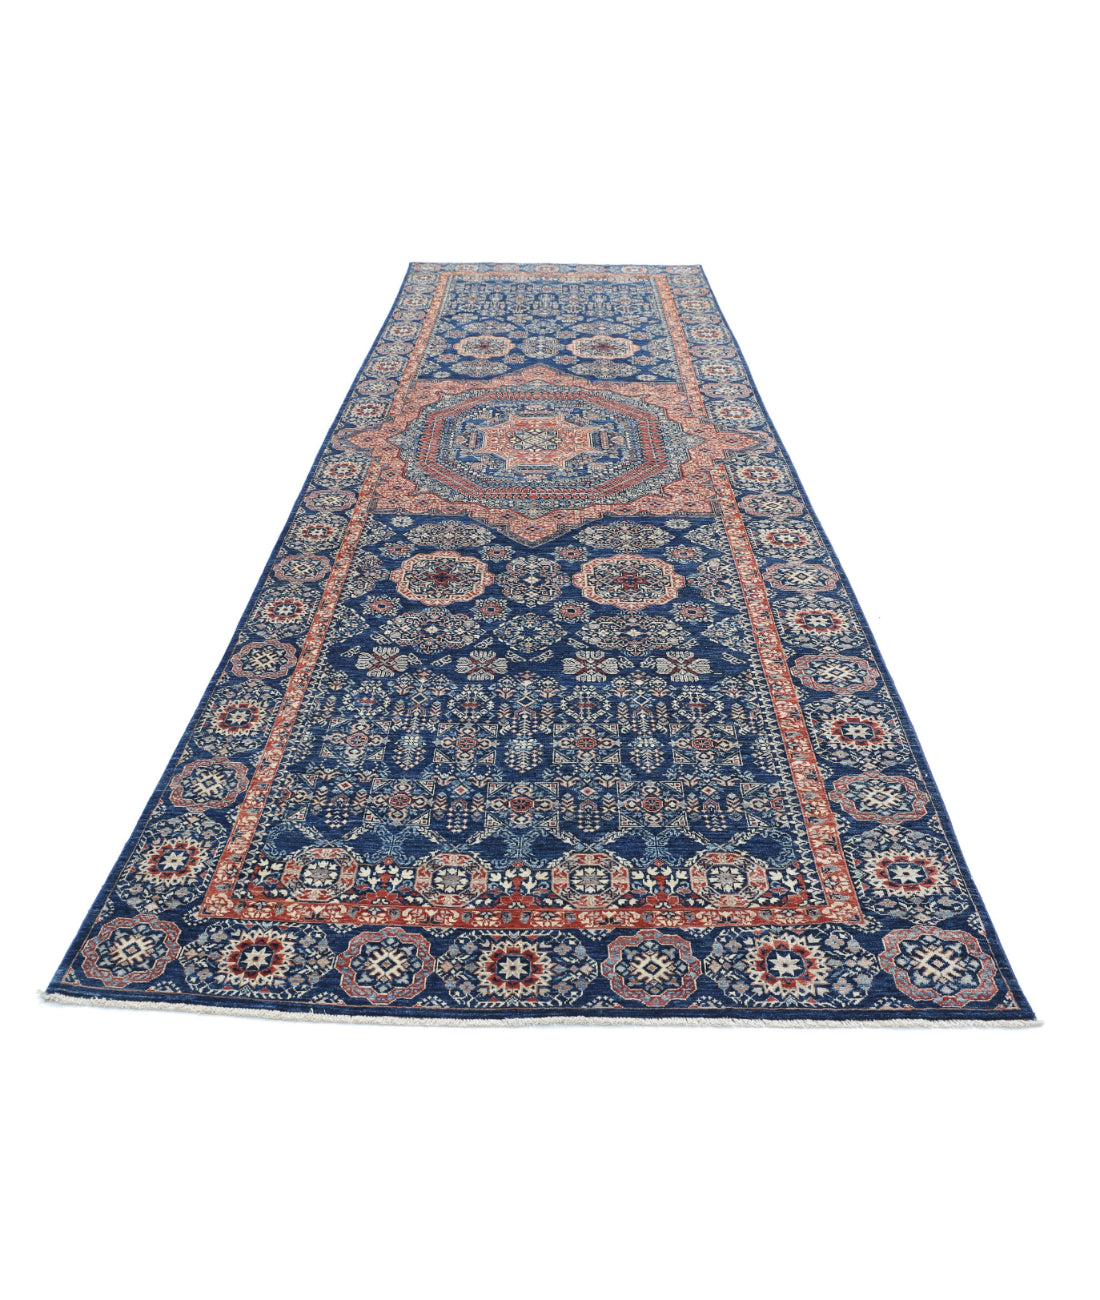 Mamluk 4'9'' X 15'4'' Hand-Knotted Wool Rug 4'9'' x 15'4'' (143 X 460) / Blue / Red